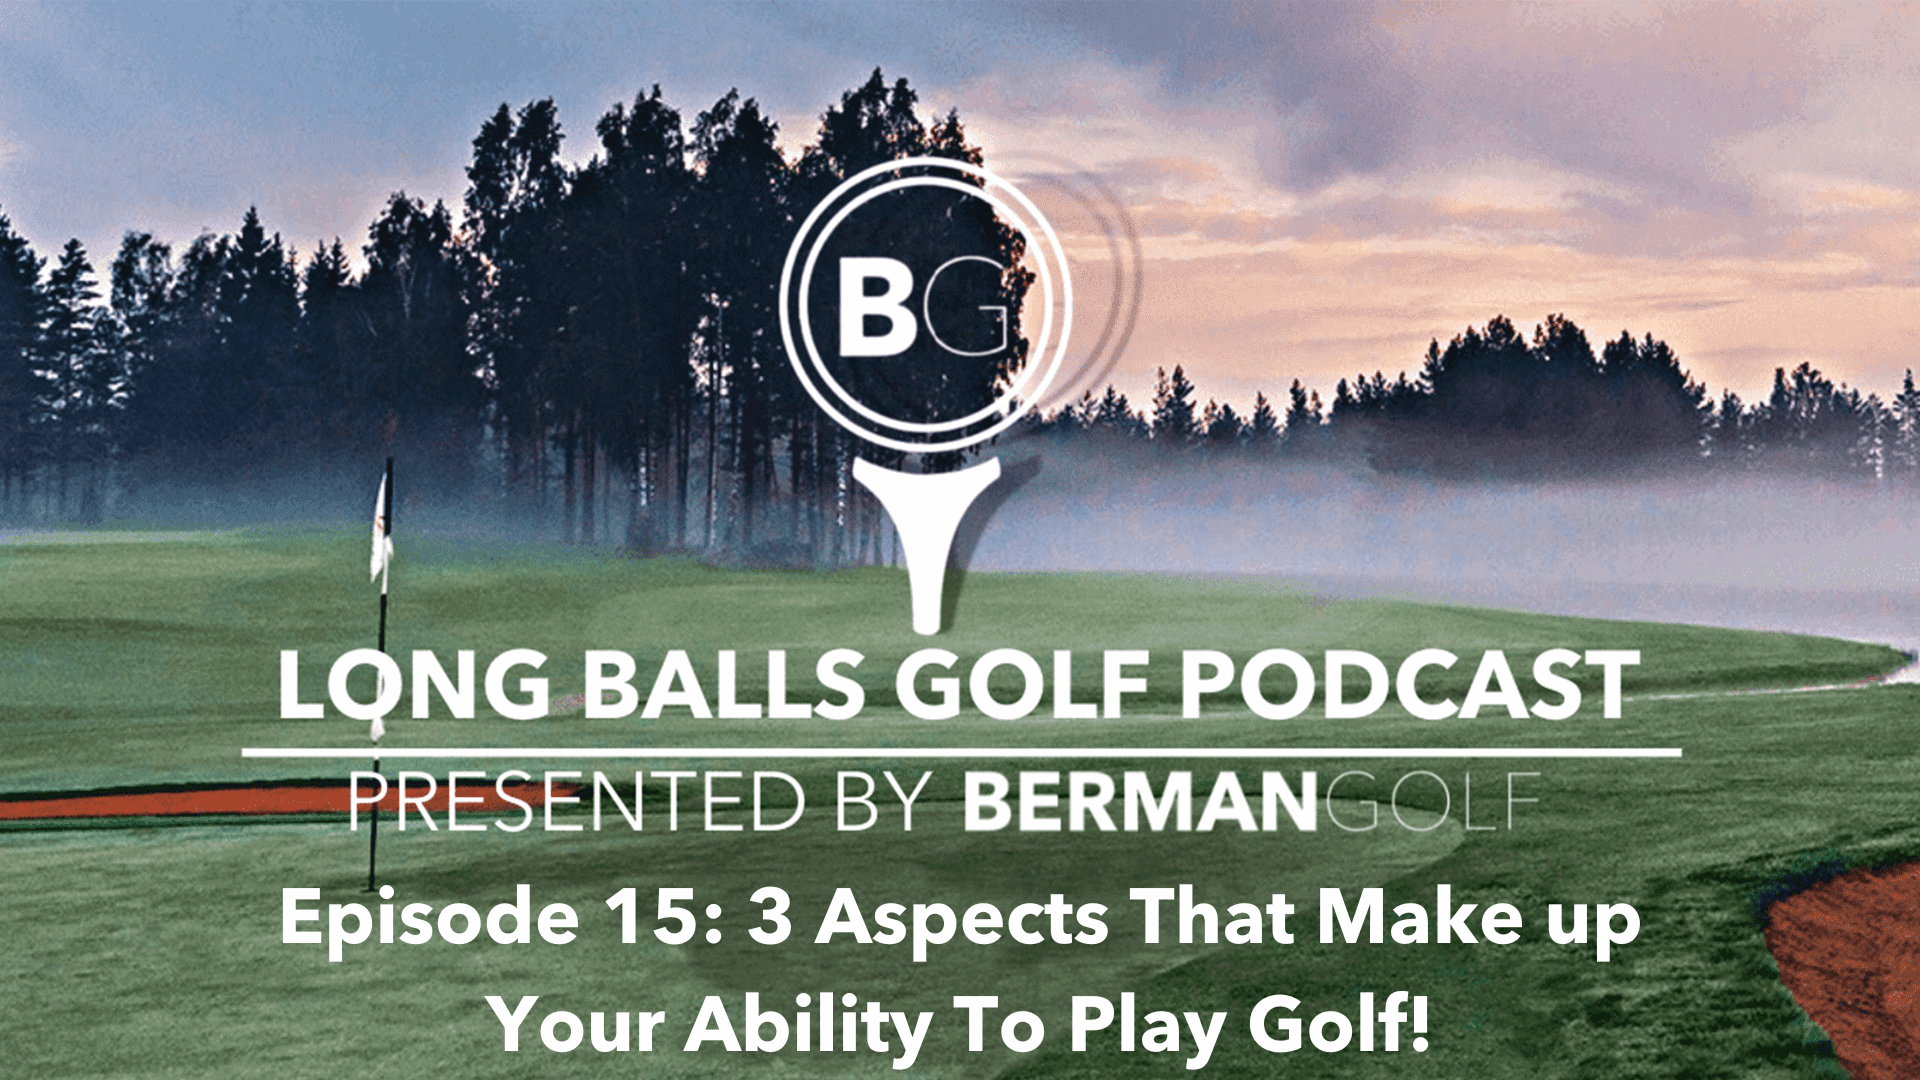 Episode 15: 3 Aspects That Make Up Your Ability To Play Golf!